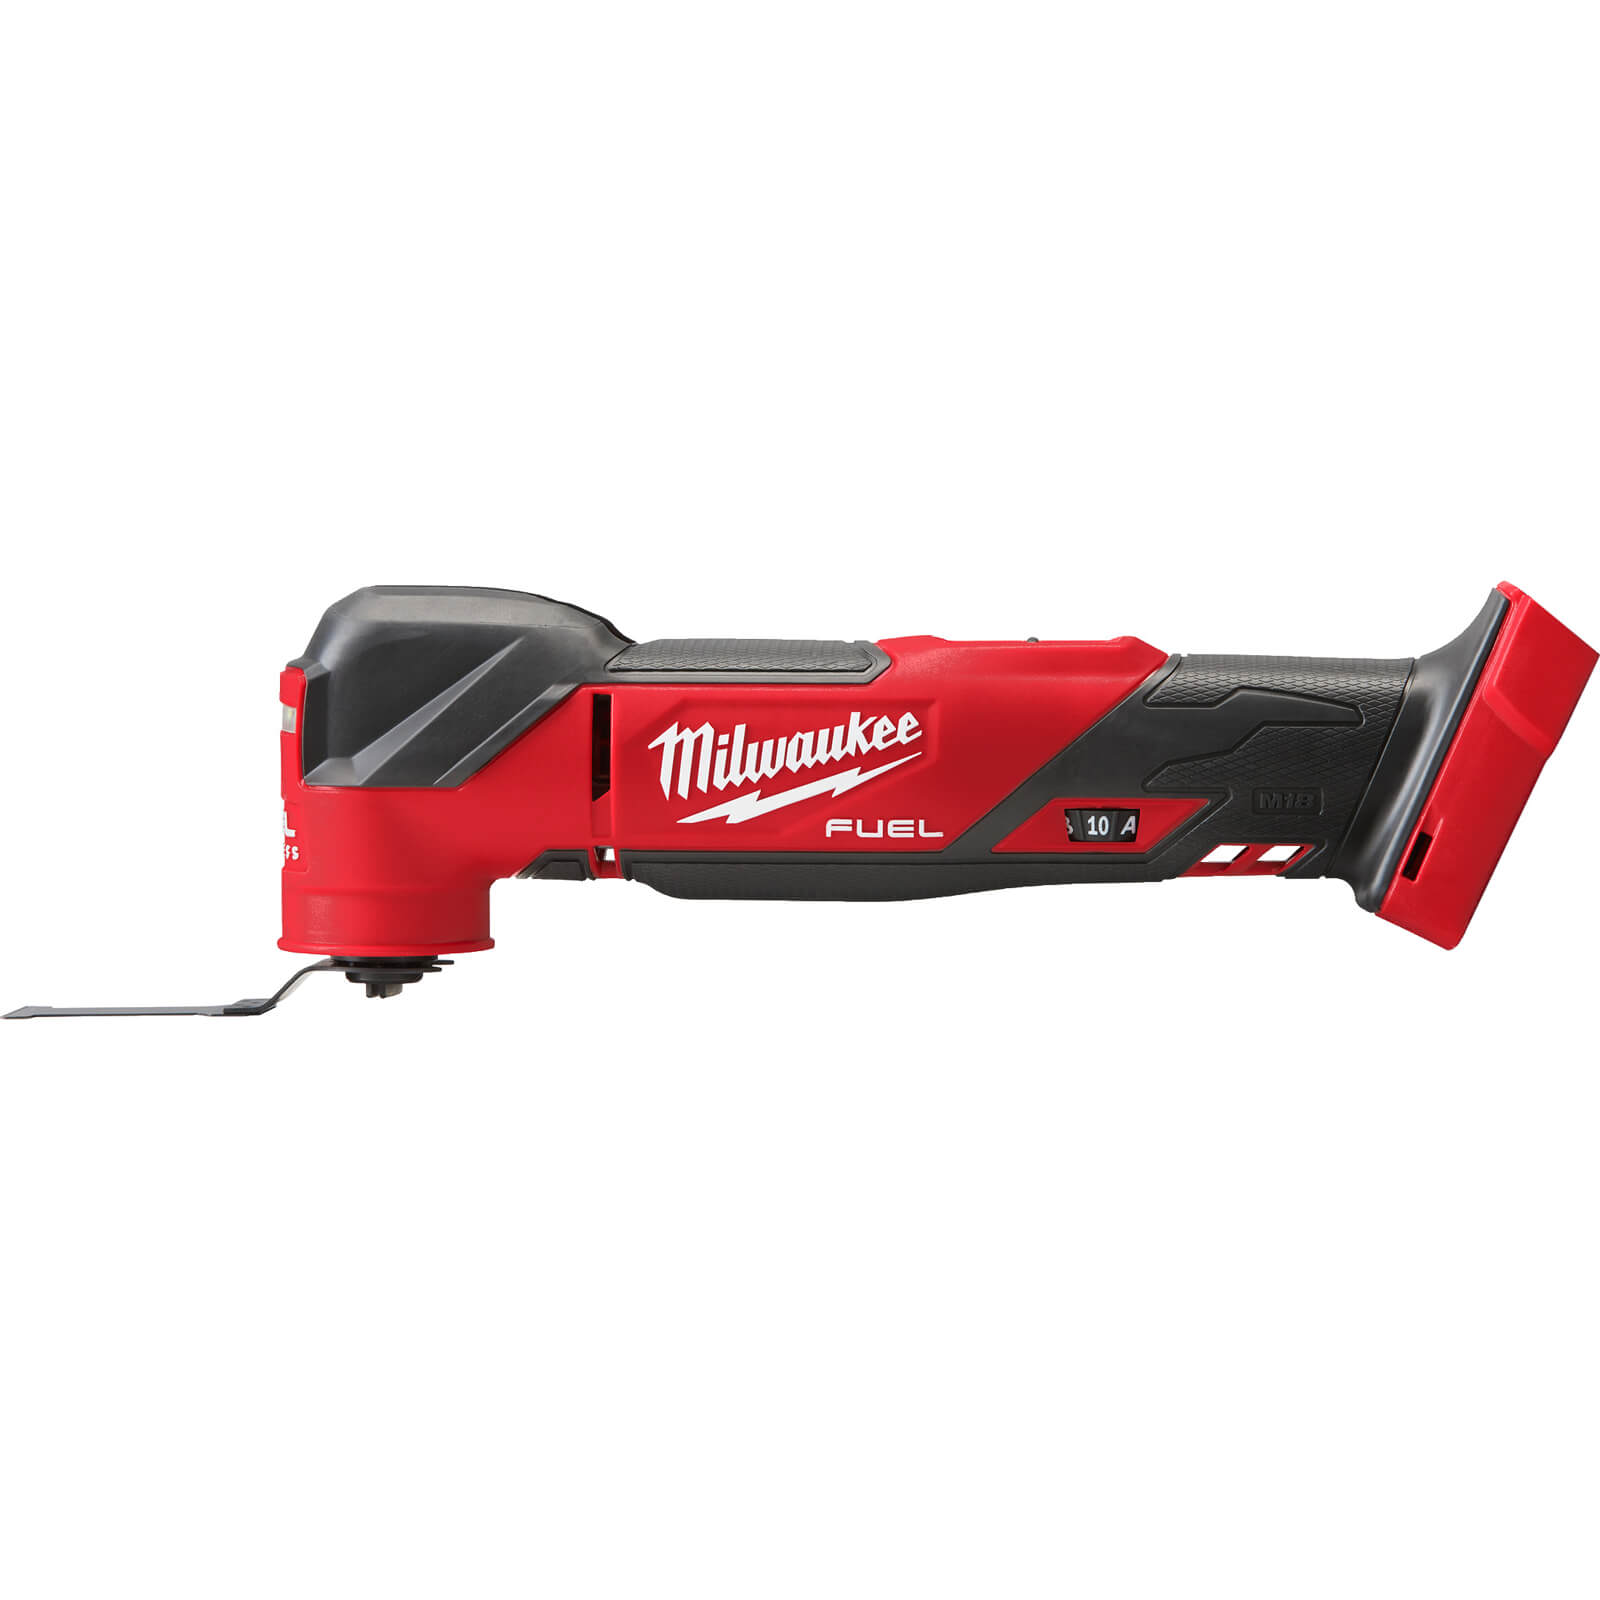 Milwaukee M18 FMT Fuel 18v Cordless Brushless Oscillating Multi Tool No Batteries No Charger Case